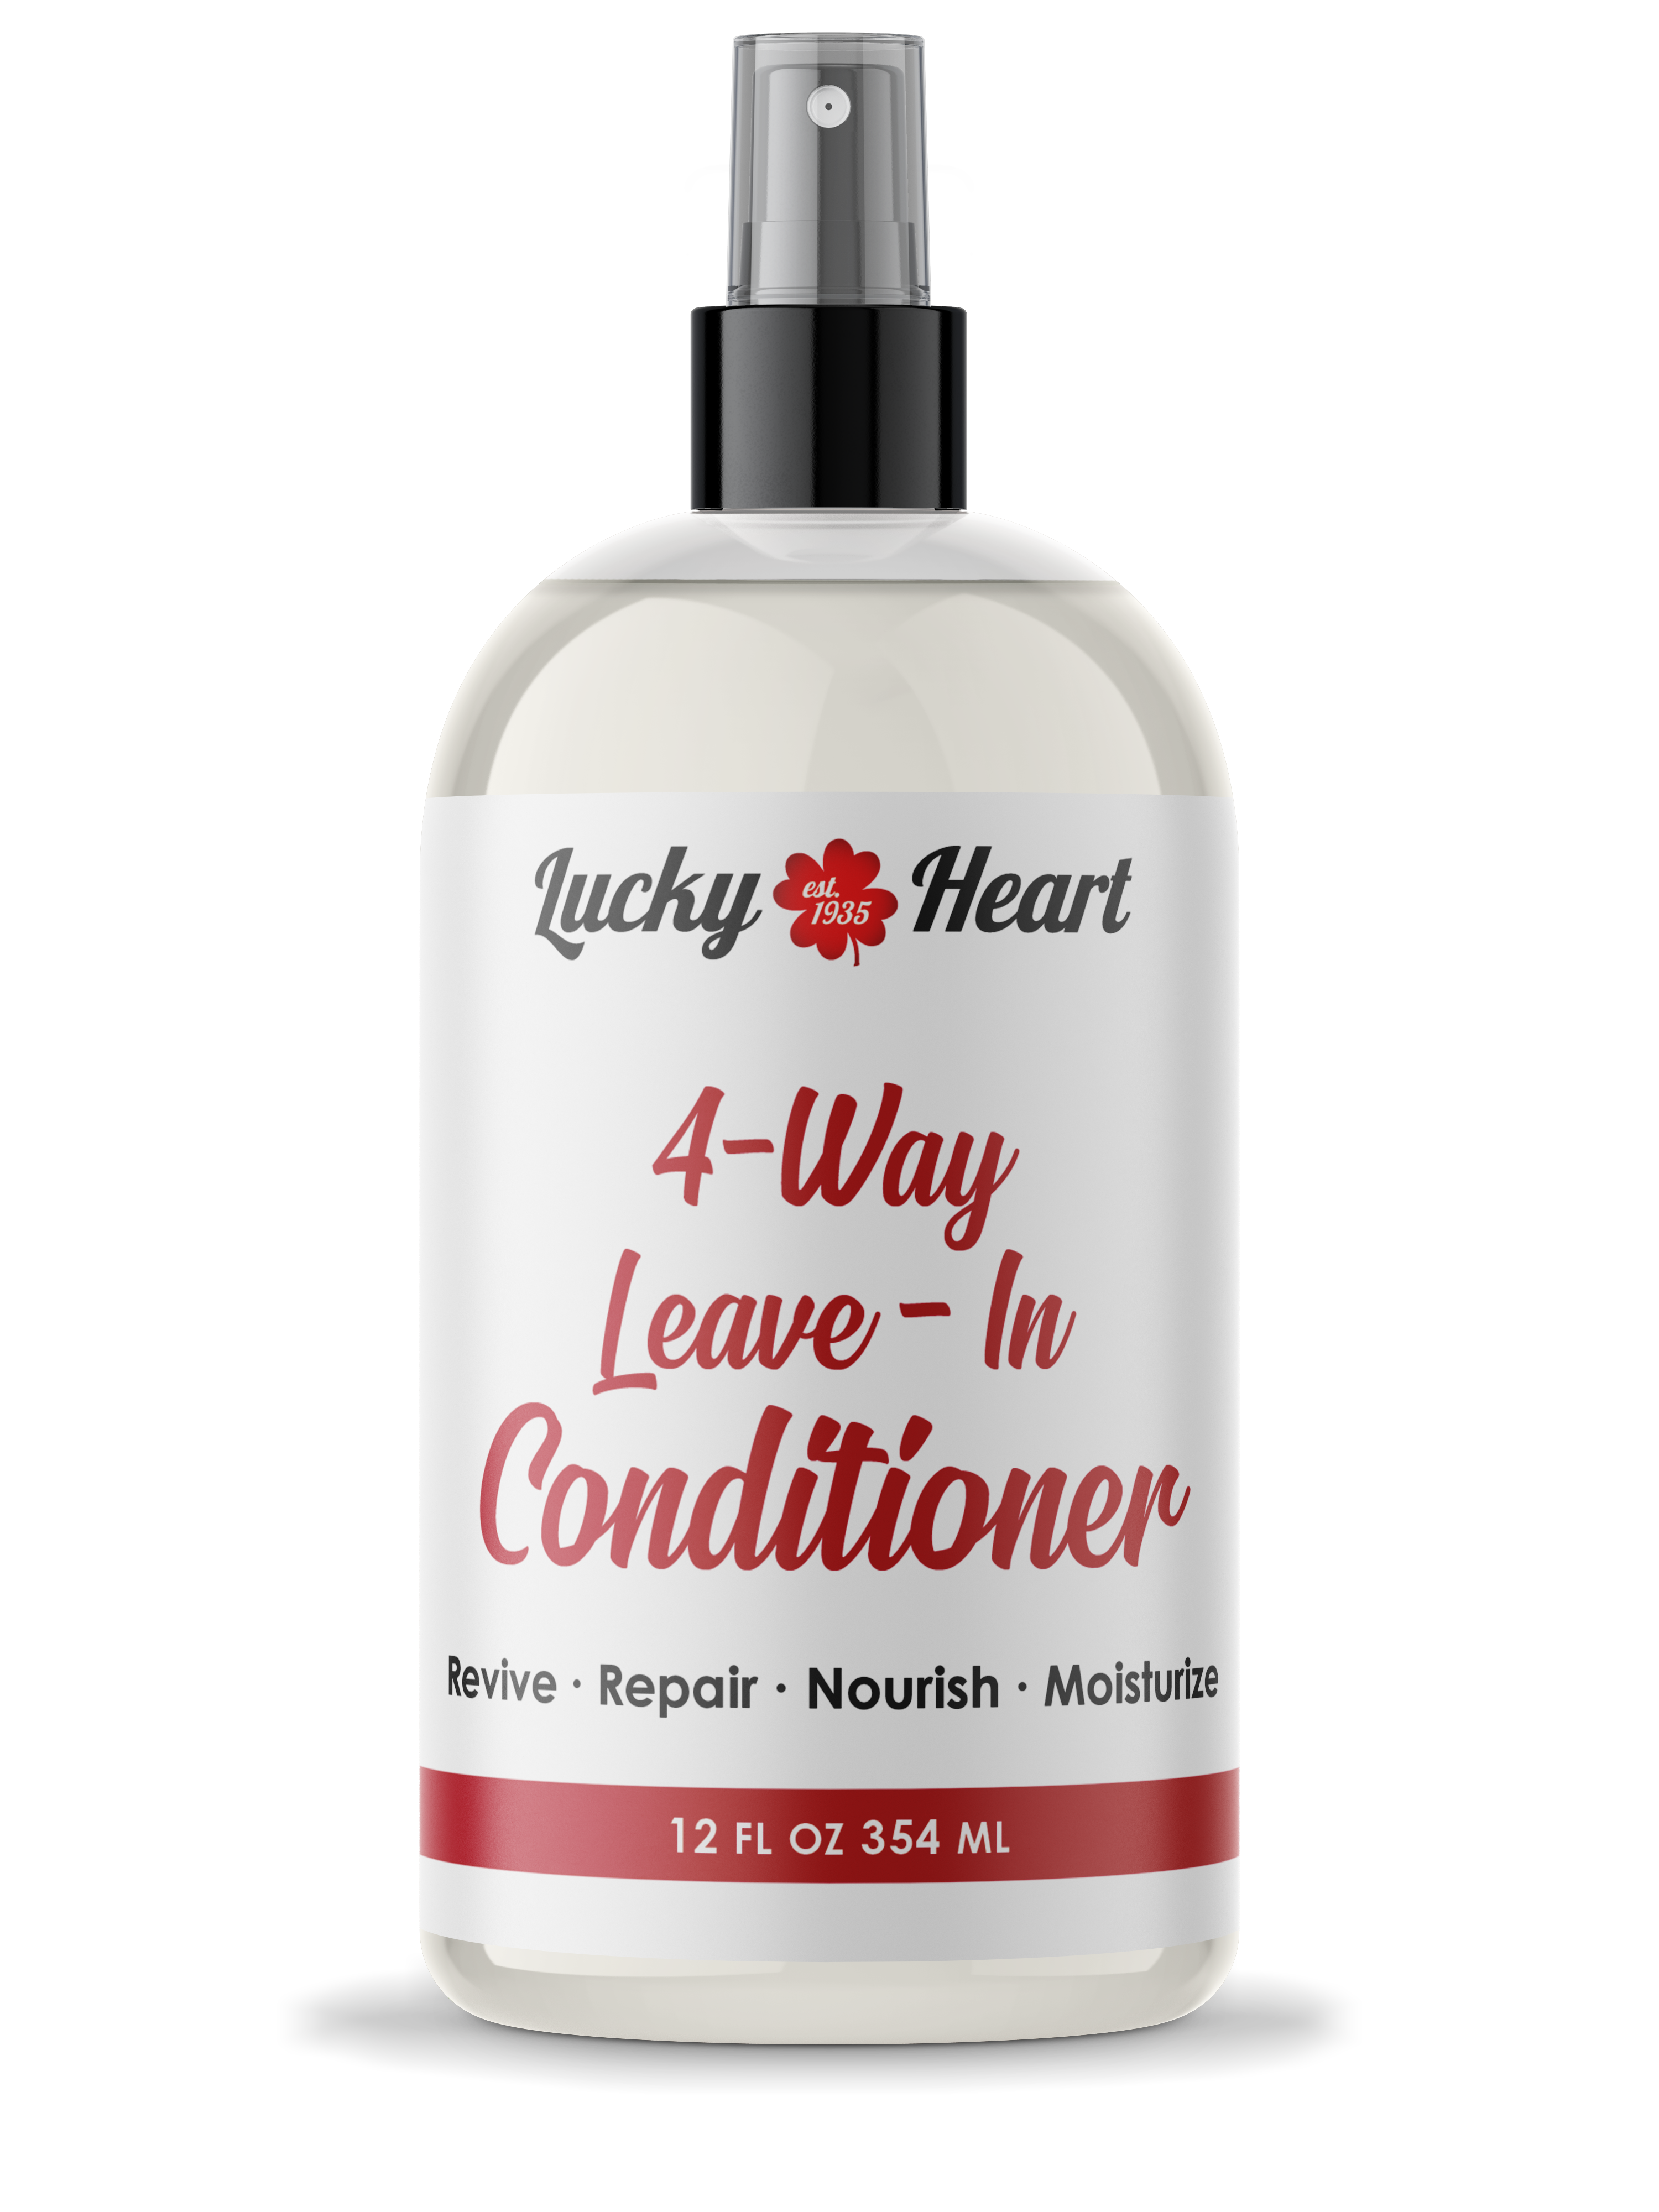 Leave in conditioner by Lucky Heart Cosmetics